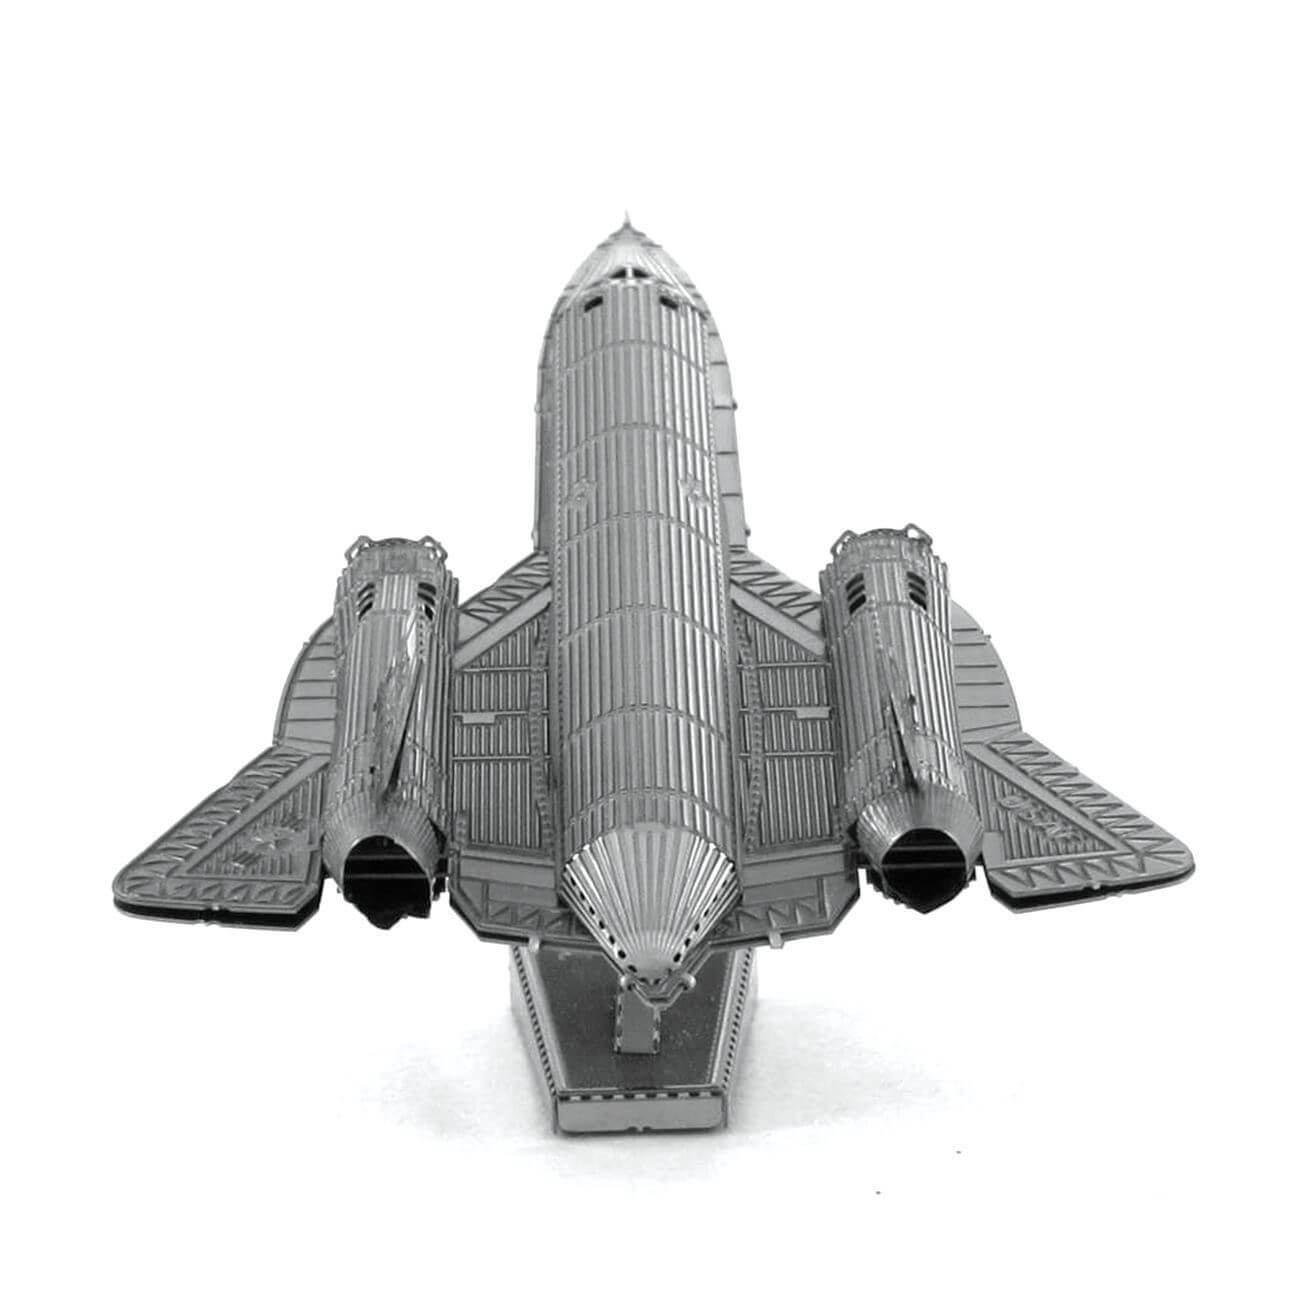 Back view of the completed blackbird.